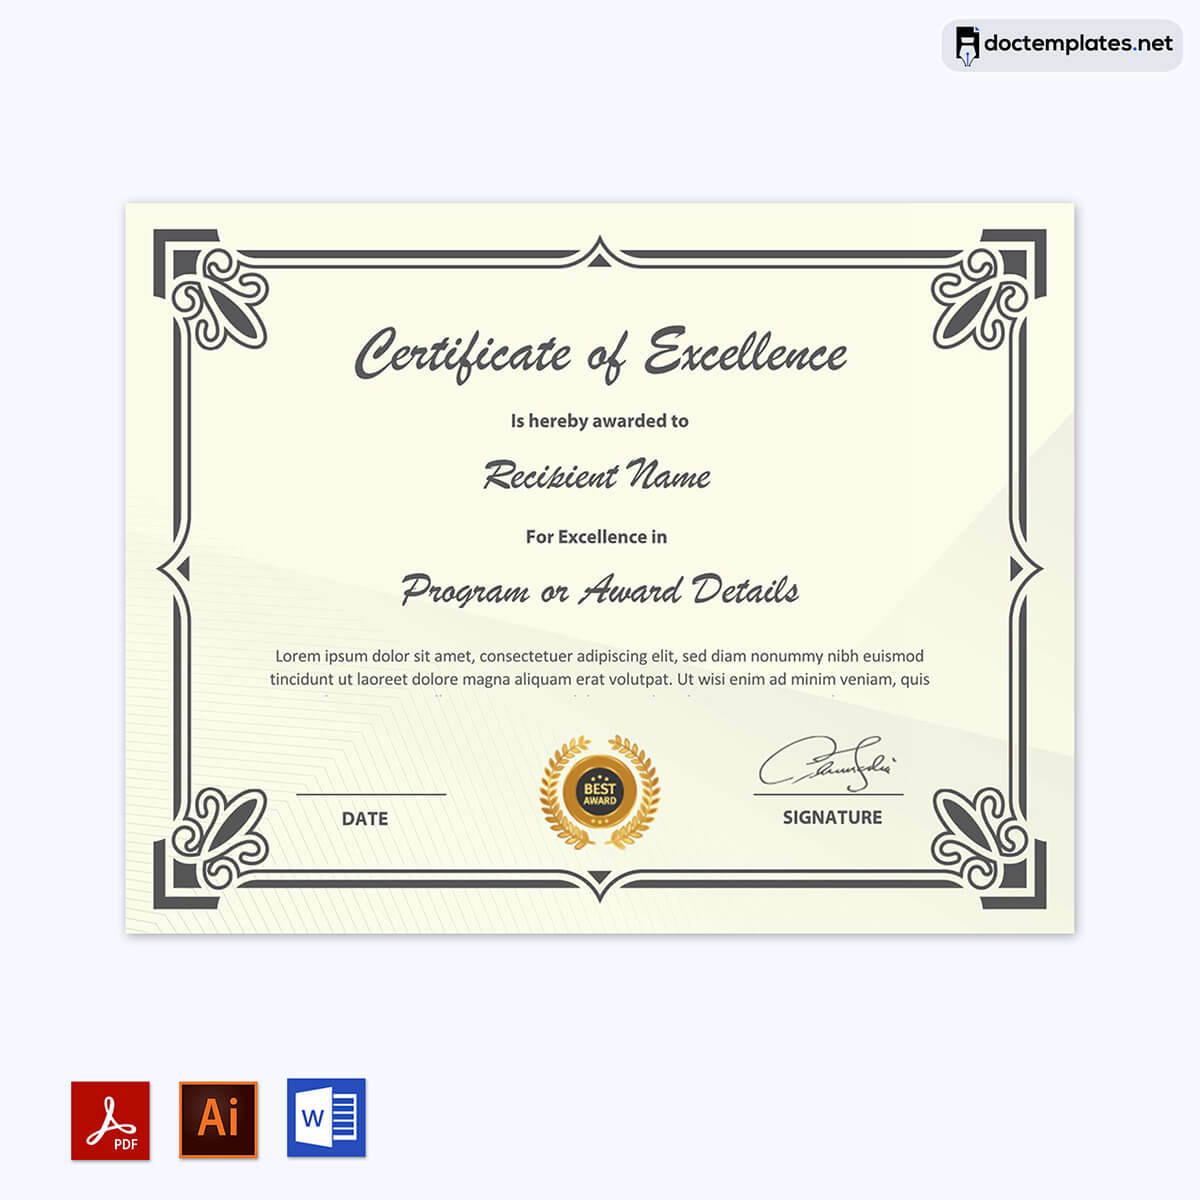 
award of excellence certificate template
